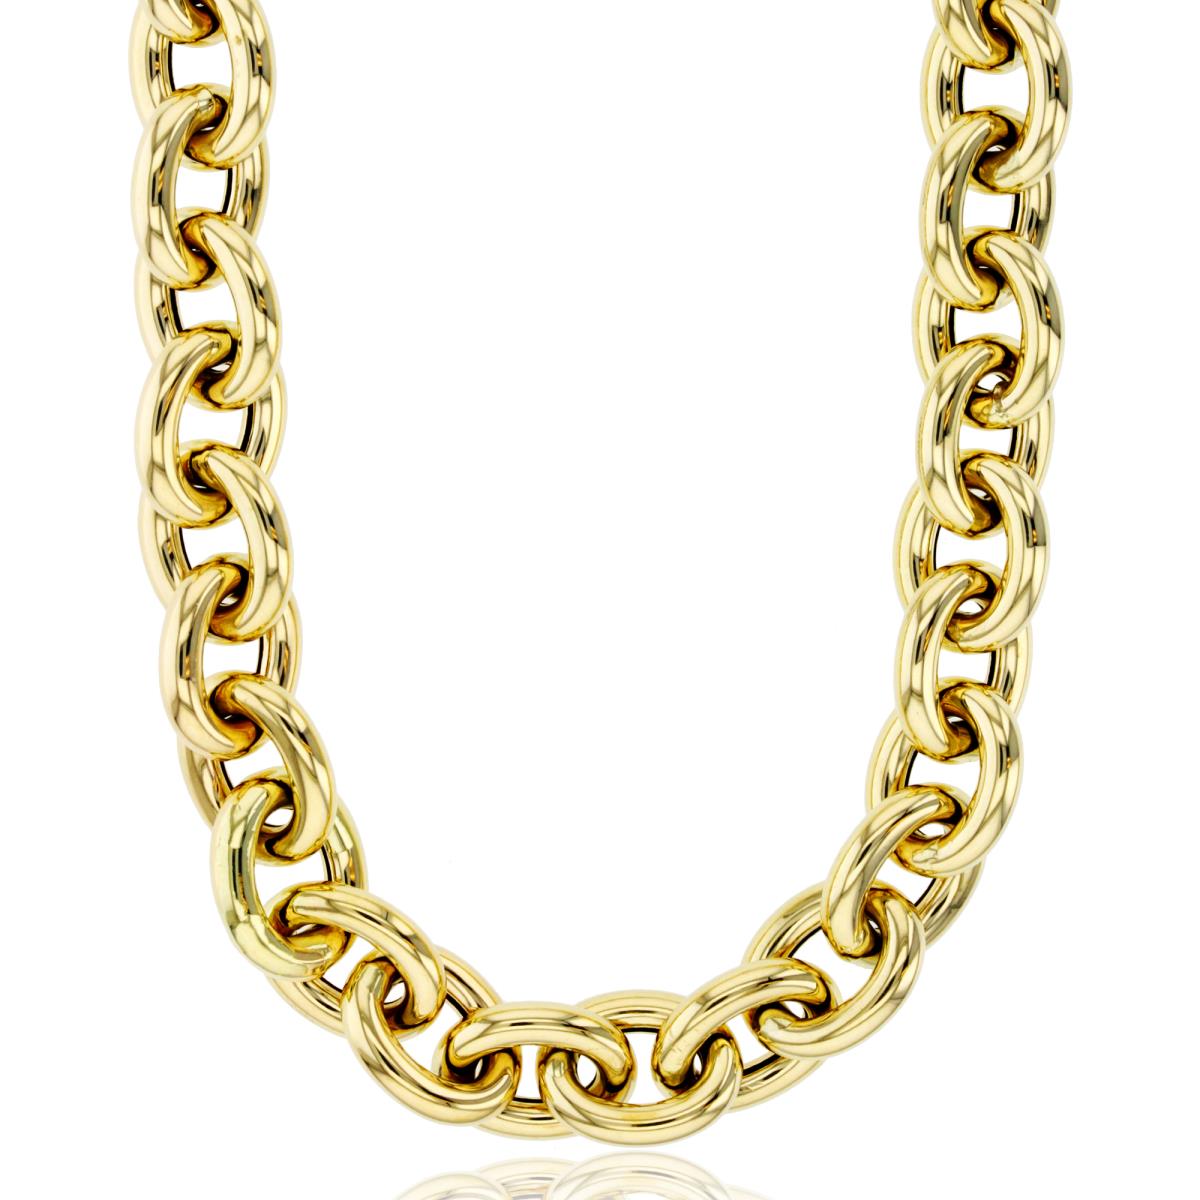 14K Yellow Gold Polished 10mm Oval Links 18" Chain